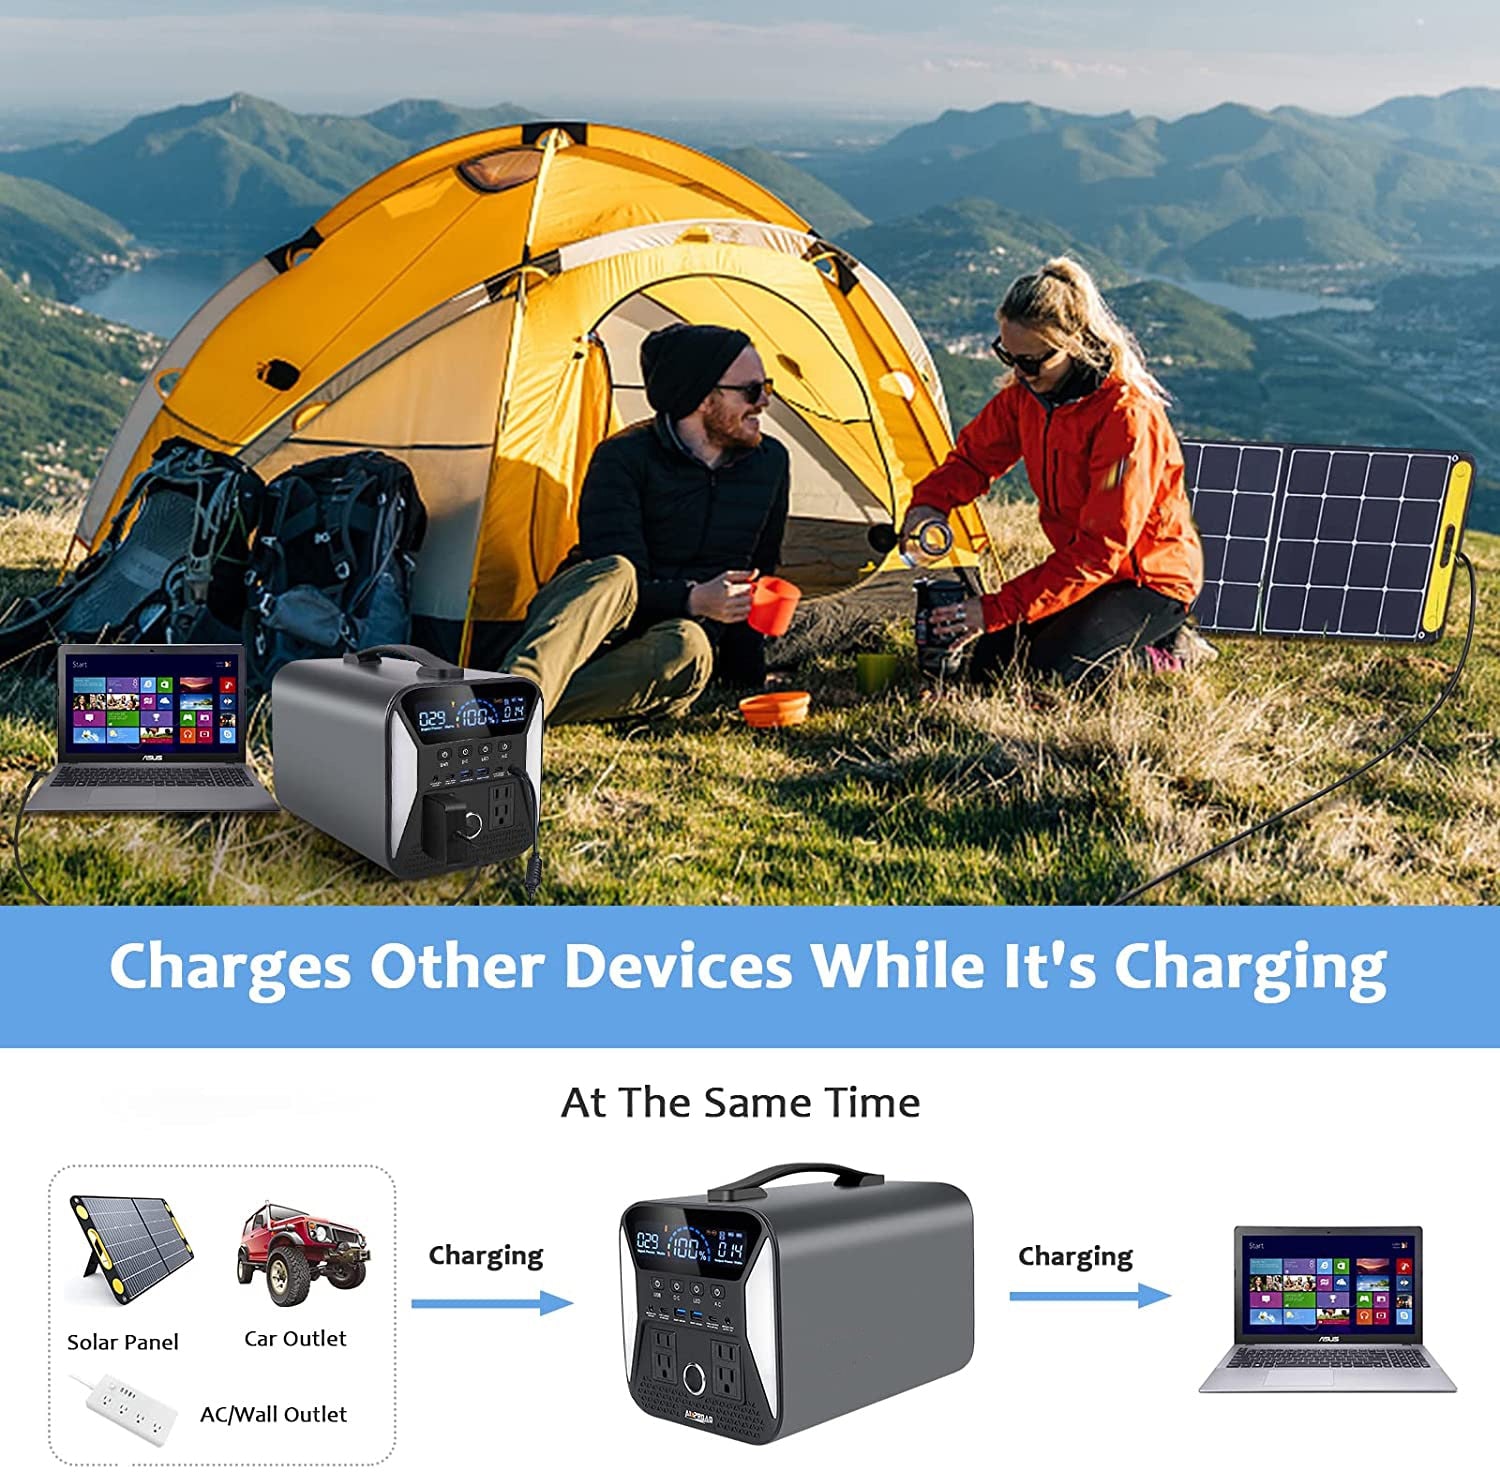 300W Portable Power Station Camping Solar Generator 220V Lifepo4 18650 Lithium Battery Outdoor Home RV Power Bank - PiotrD